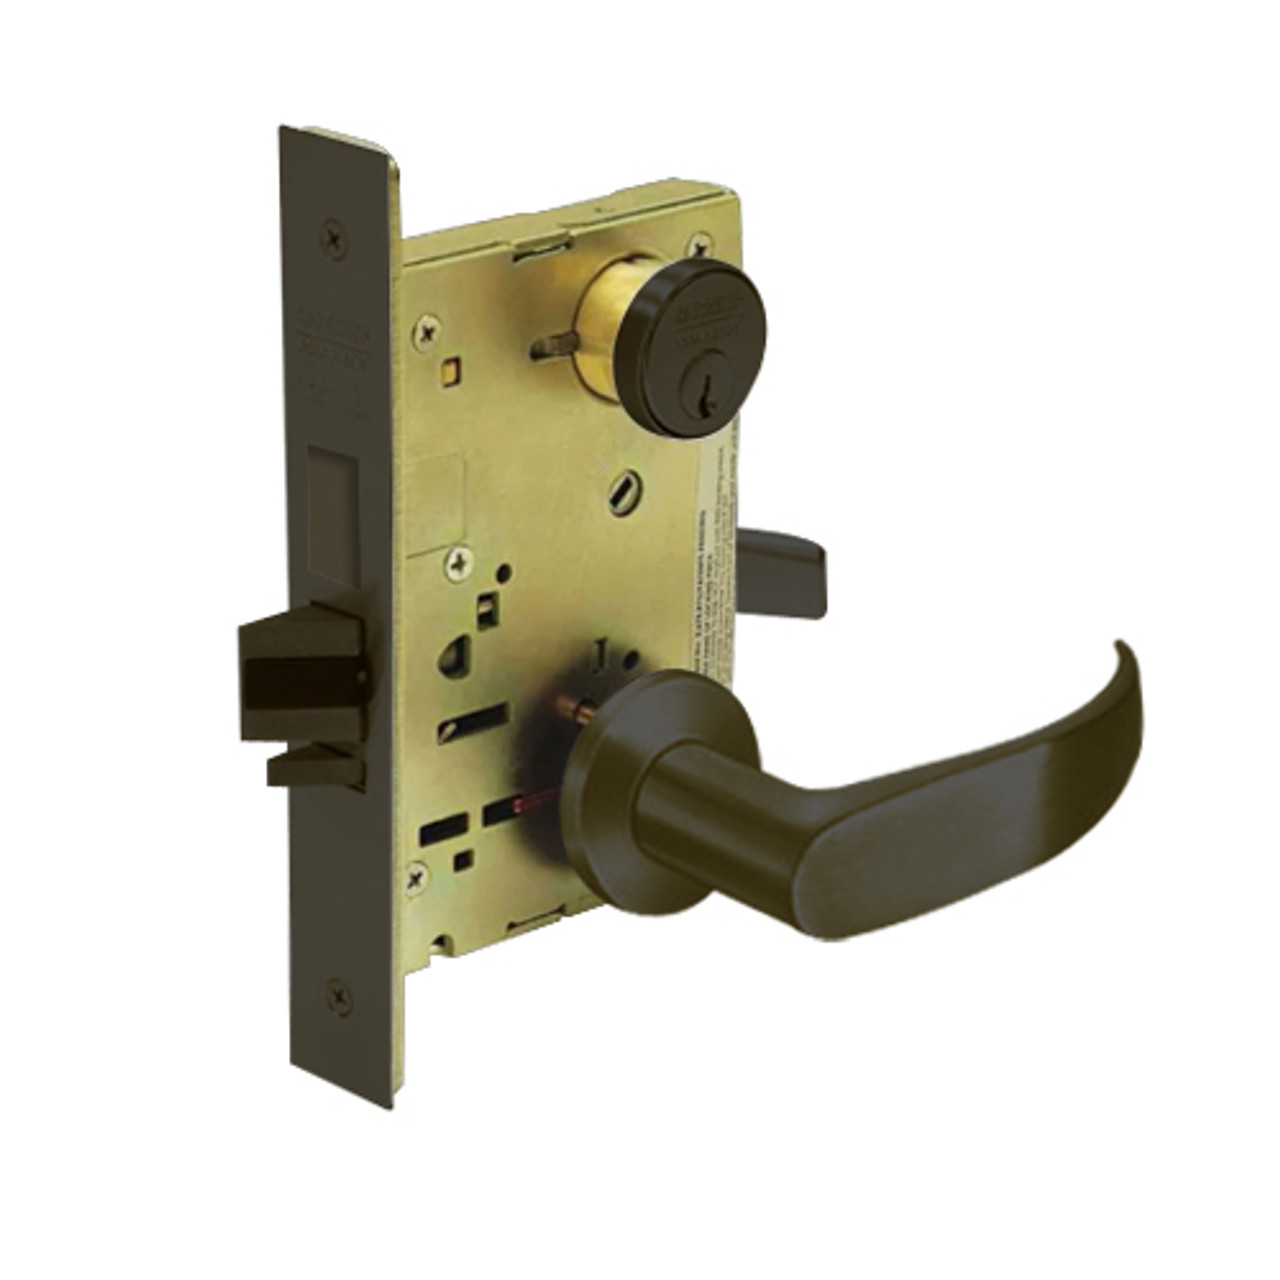 8248-LNP-10B Sargent 8200 Series Store Door Mortise Lock with LNP Lever Trim in Oxidized Dull Bronze